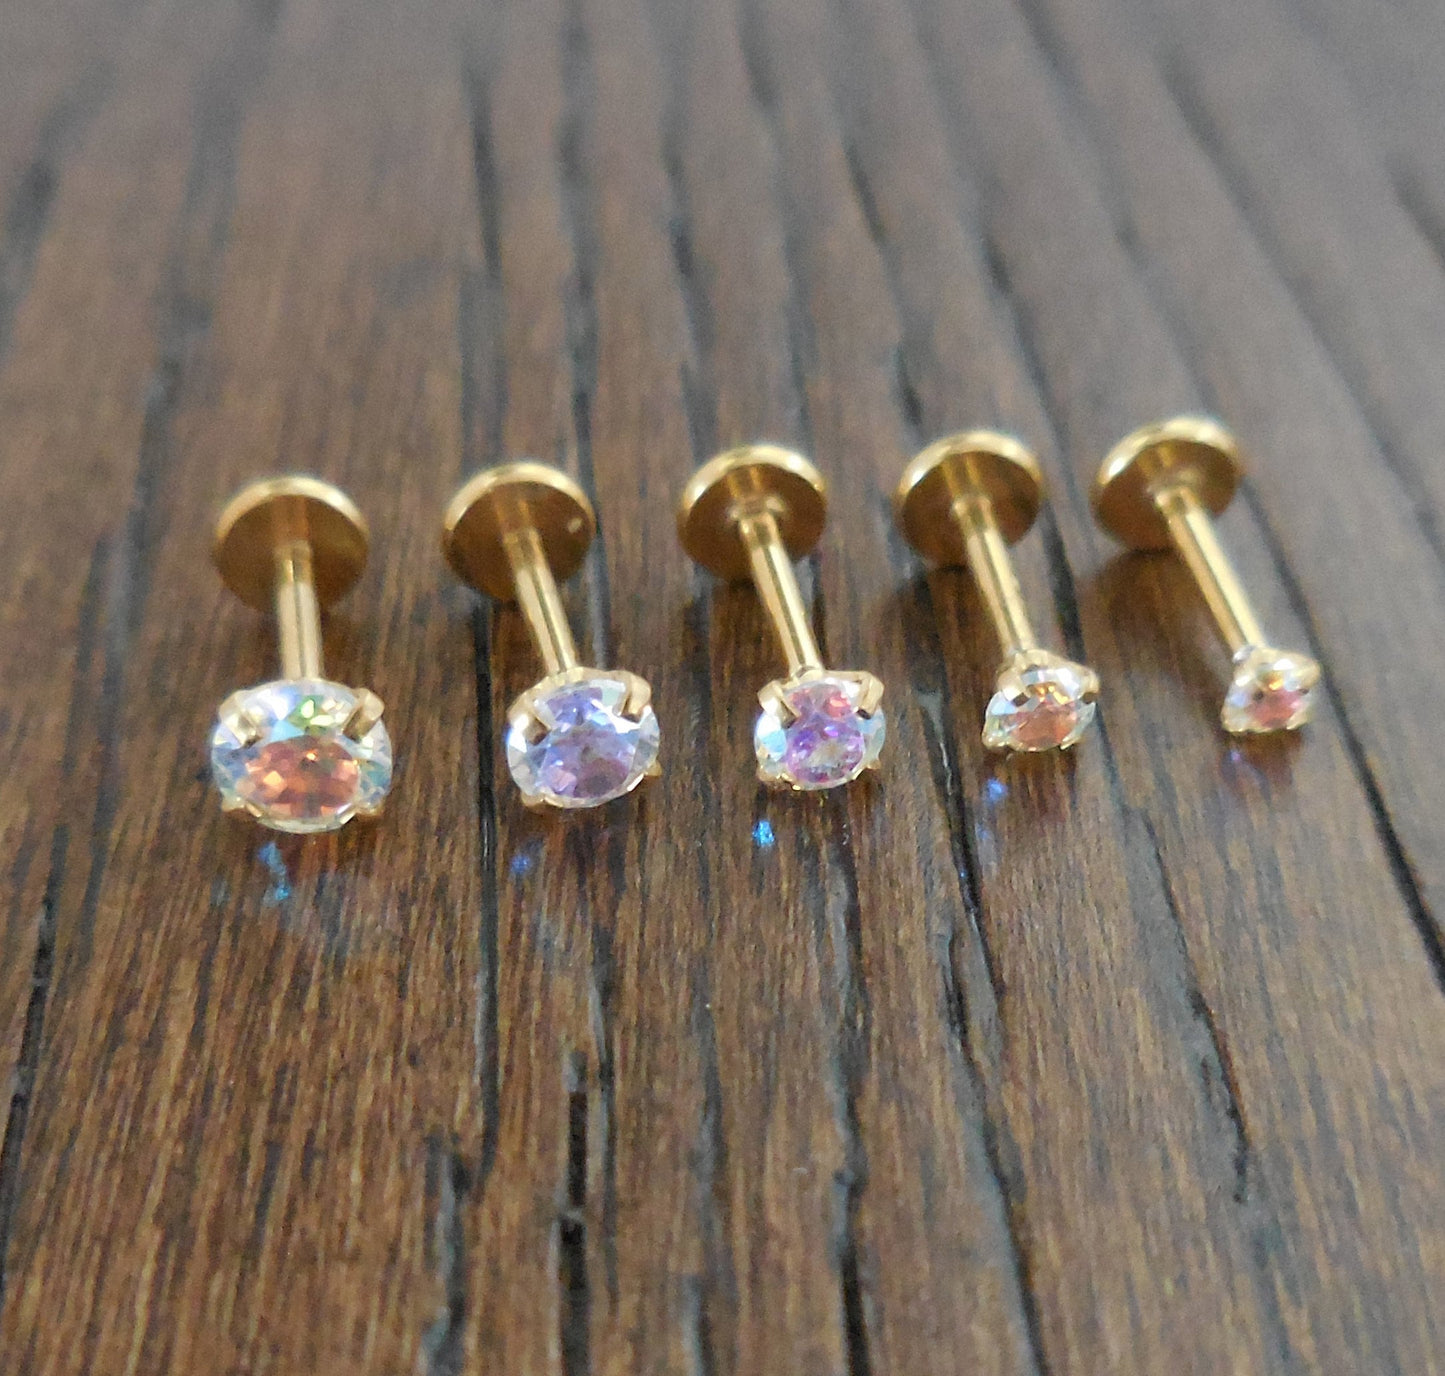 18g 2-4mm Tragus AB Crystal Push Pin Nose Ring Cartilage Earrings Gold Tone Labret Thread Less Triple Forward Helix Prong Set